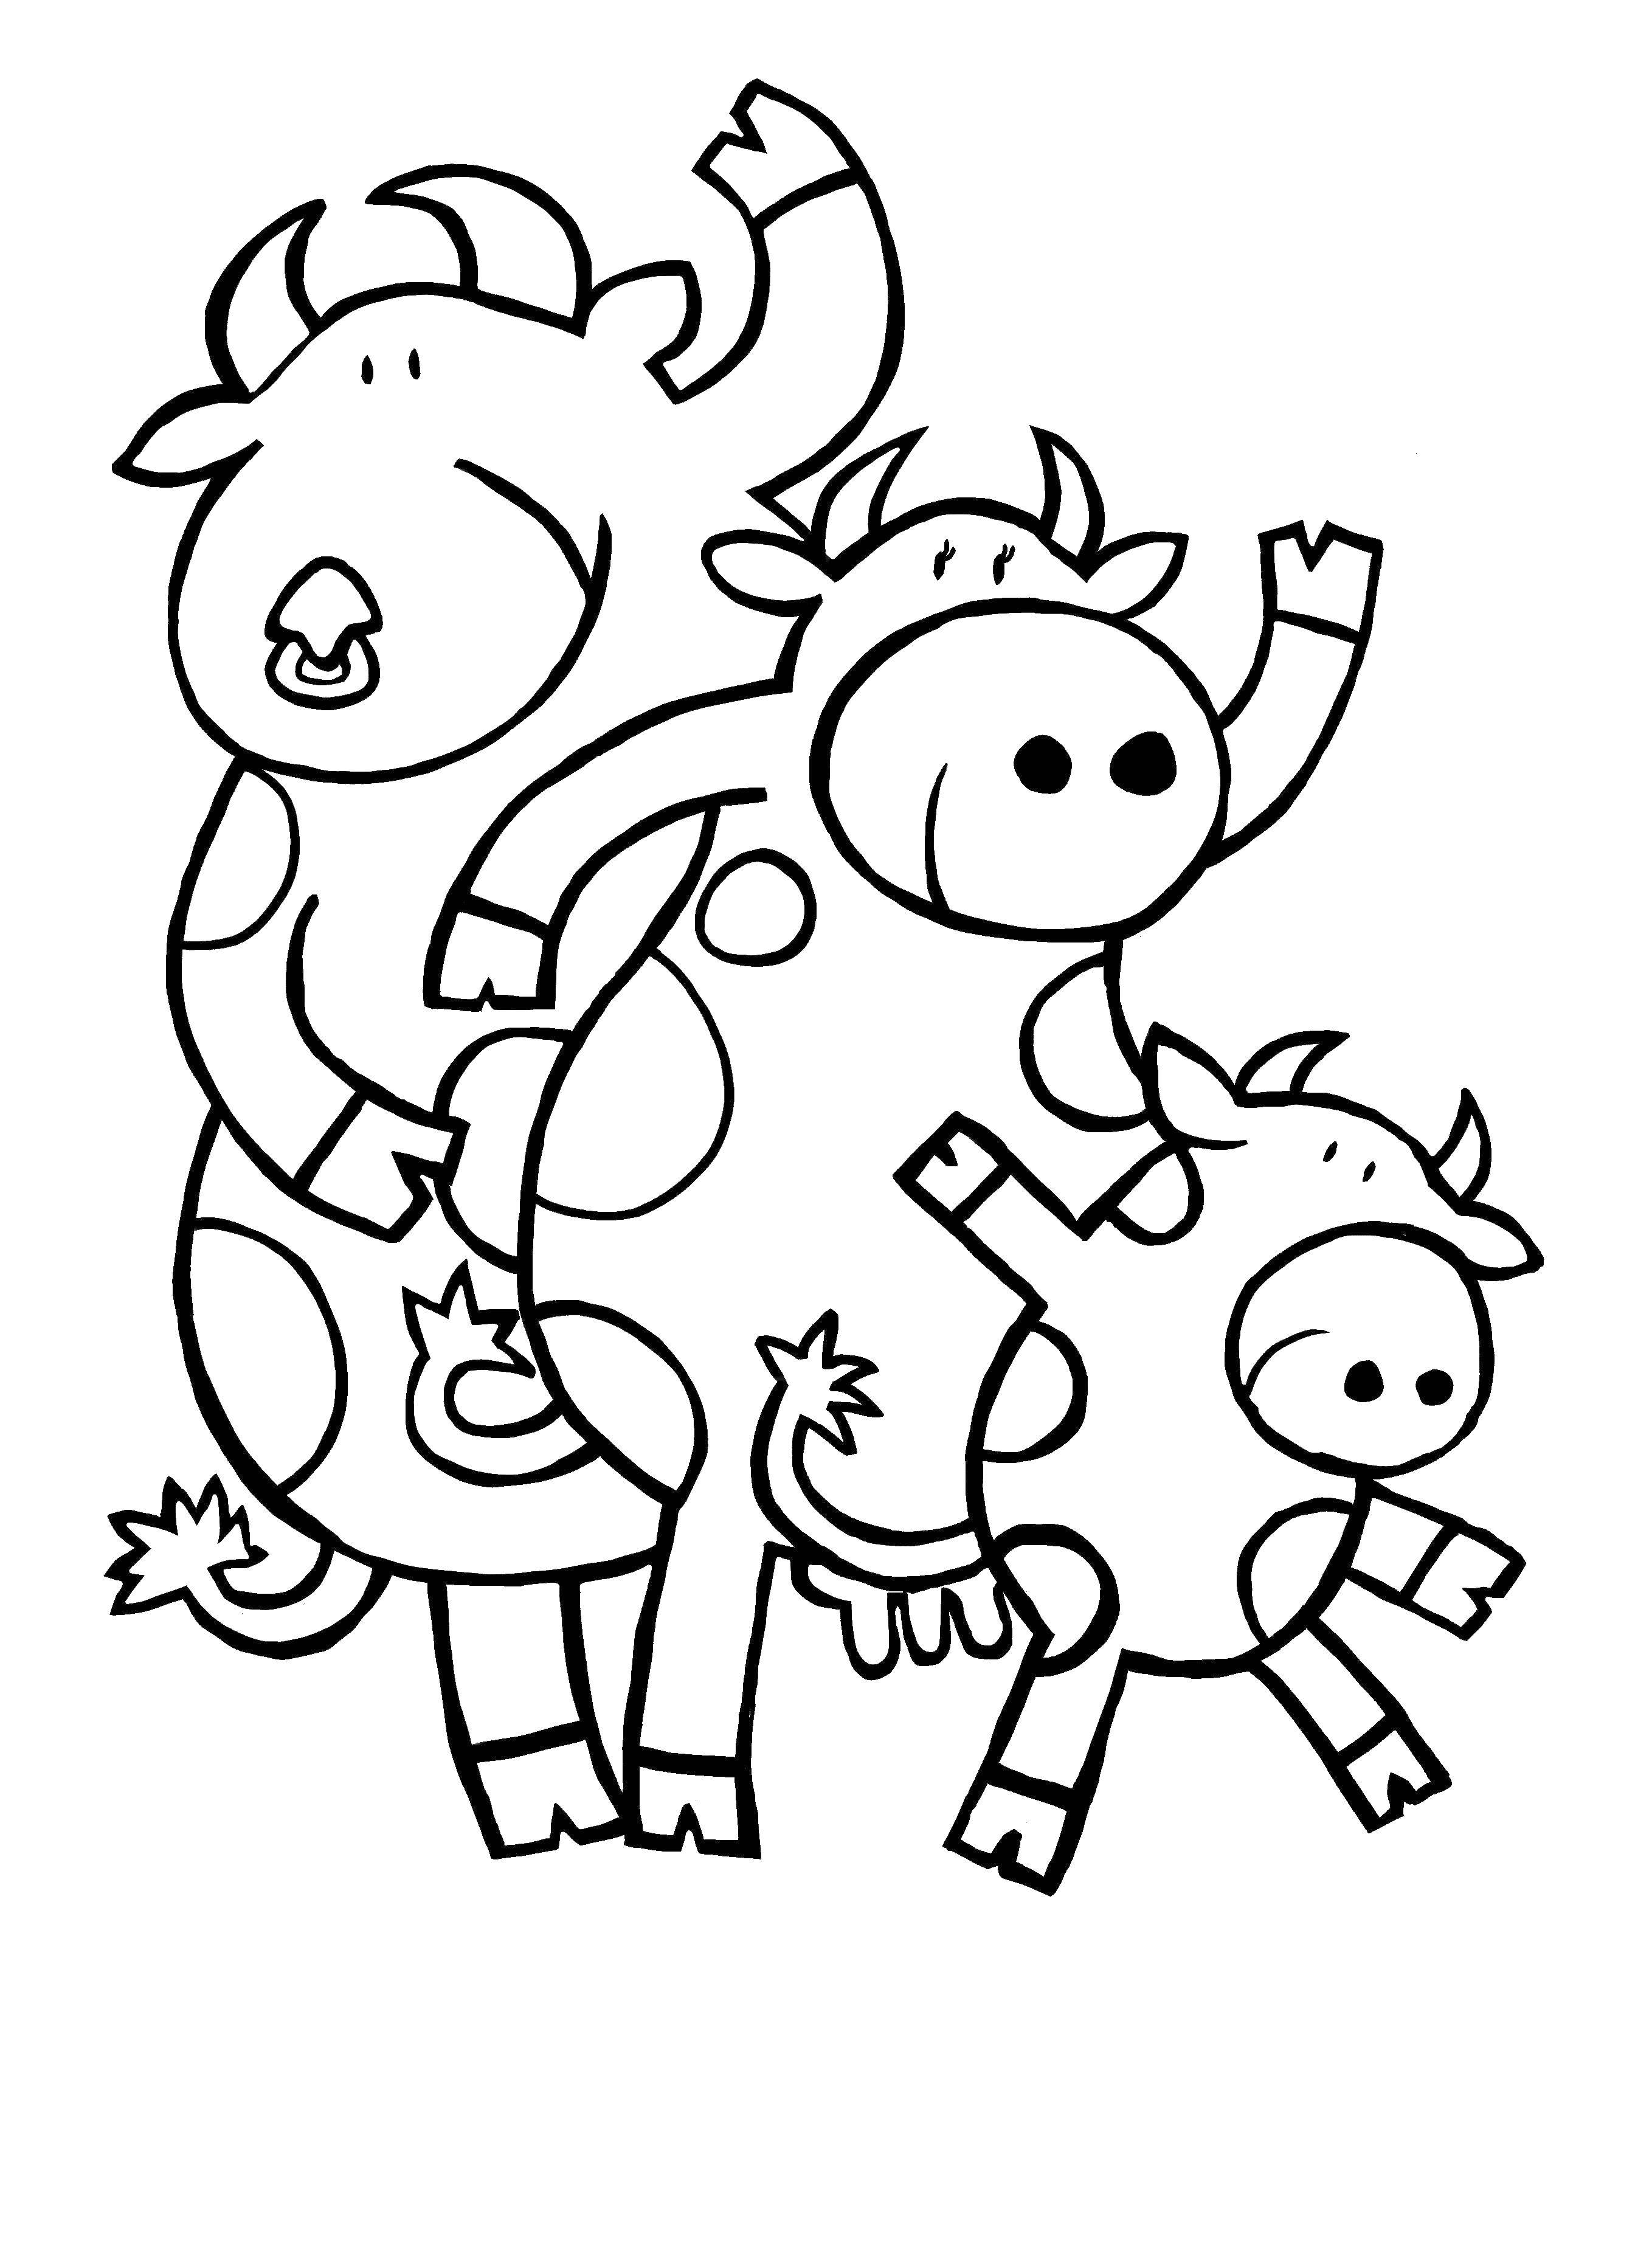 Coloring Cow family. Category Family members. Tags:  Family, parents, children.